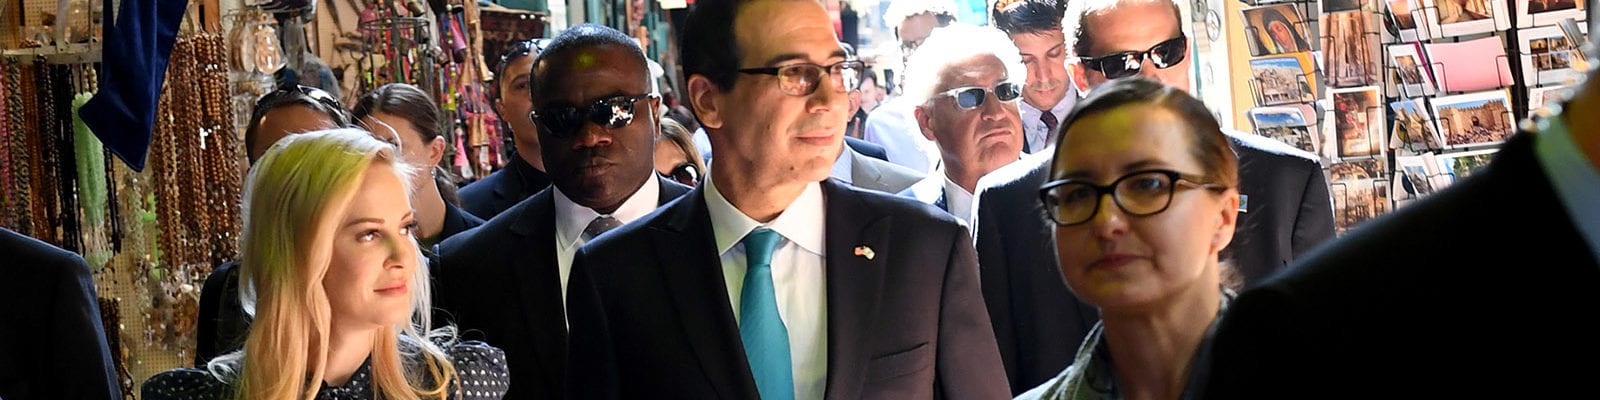 Treasury Secretary Steven Mnuchin, accompanied by U.S. Ambassador to Israel David Friedman and Acting Consul General Michael Hankey, toured the Old City of Jerusalem, making stops at the Church of the Holy Sepulcher and the Western Wall.